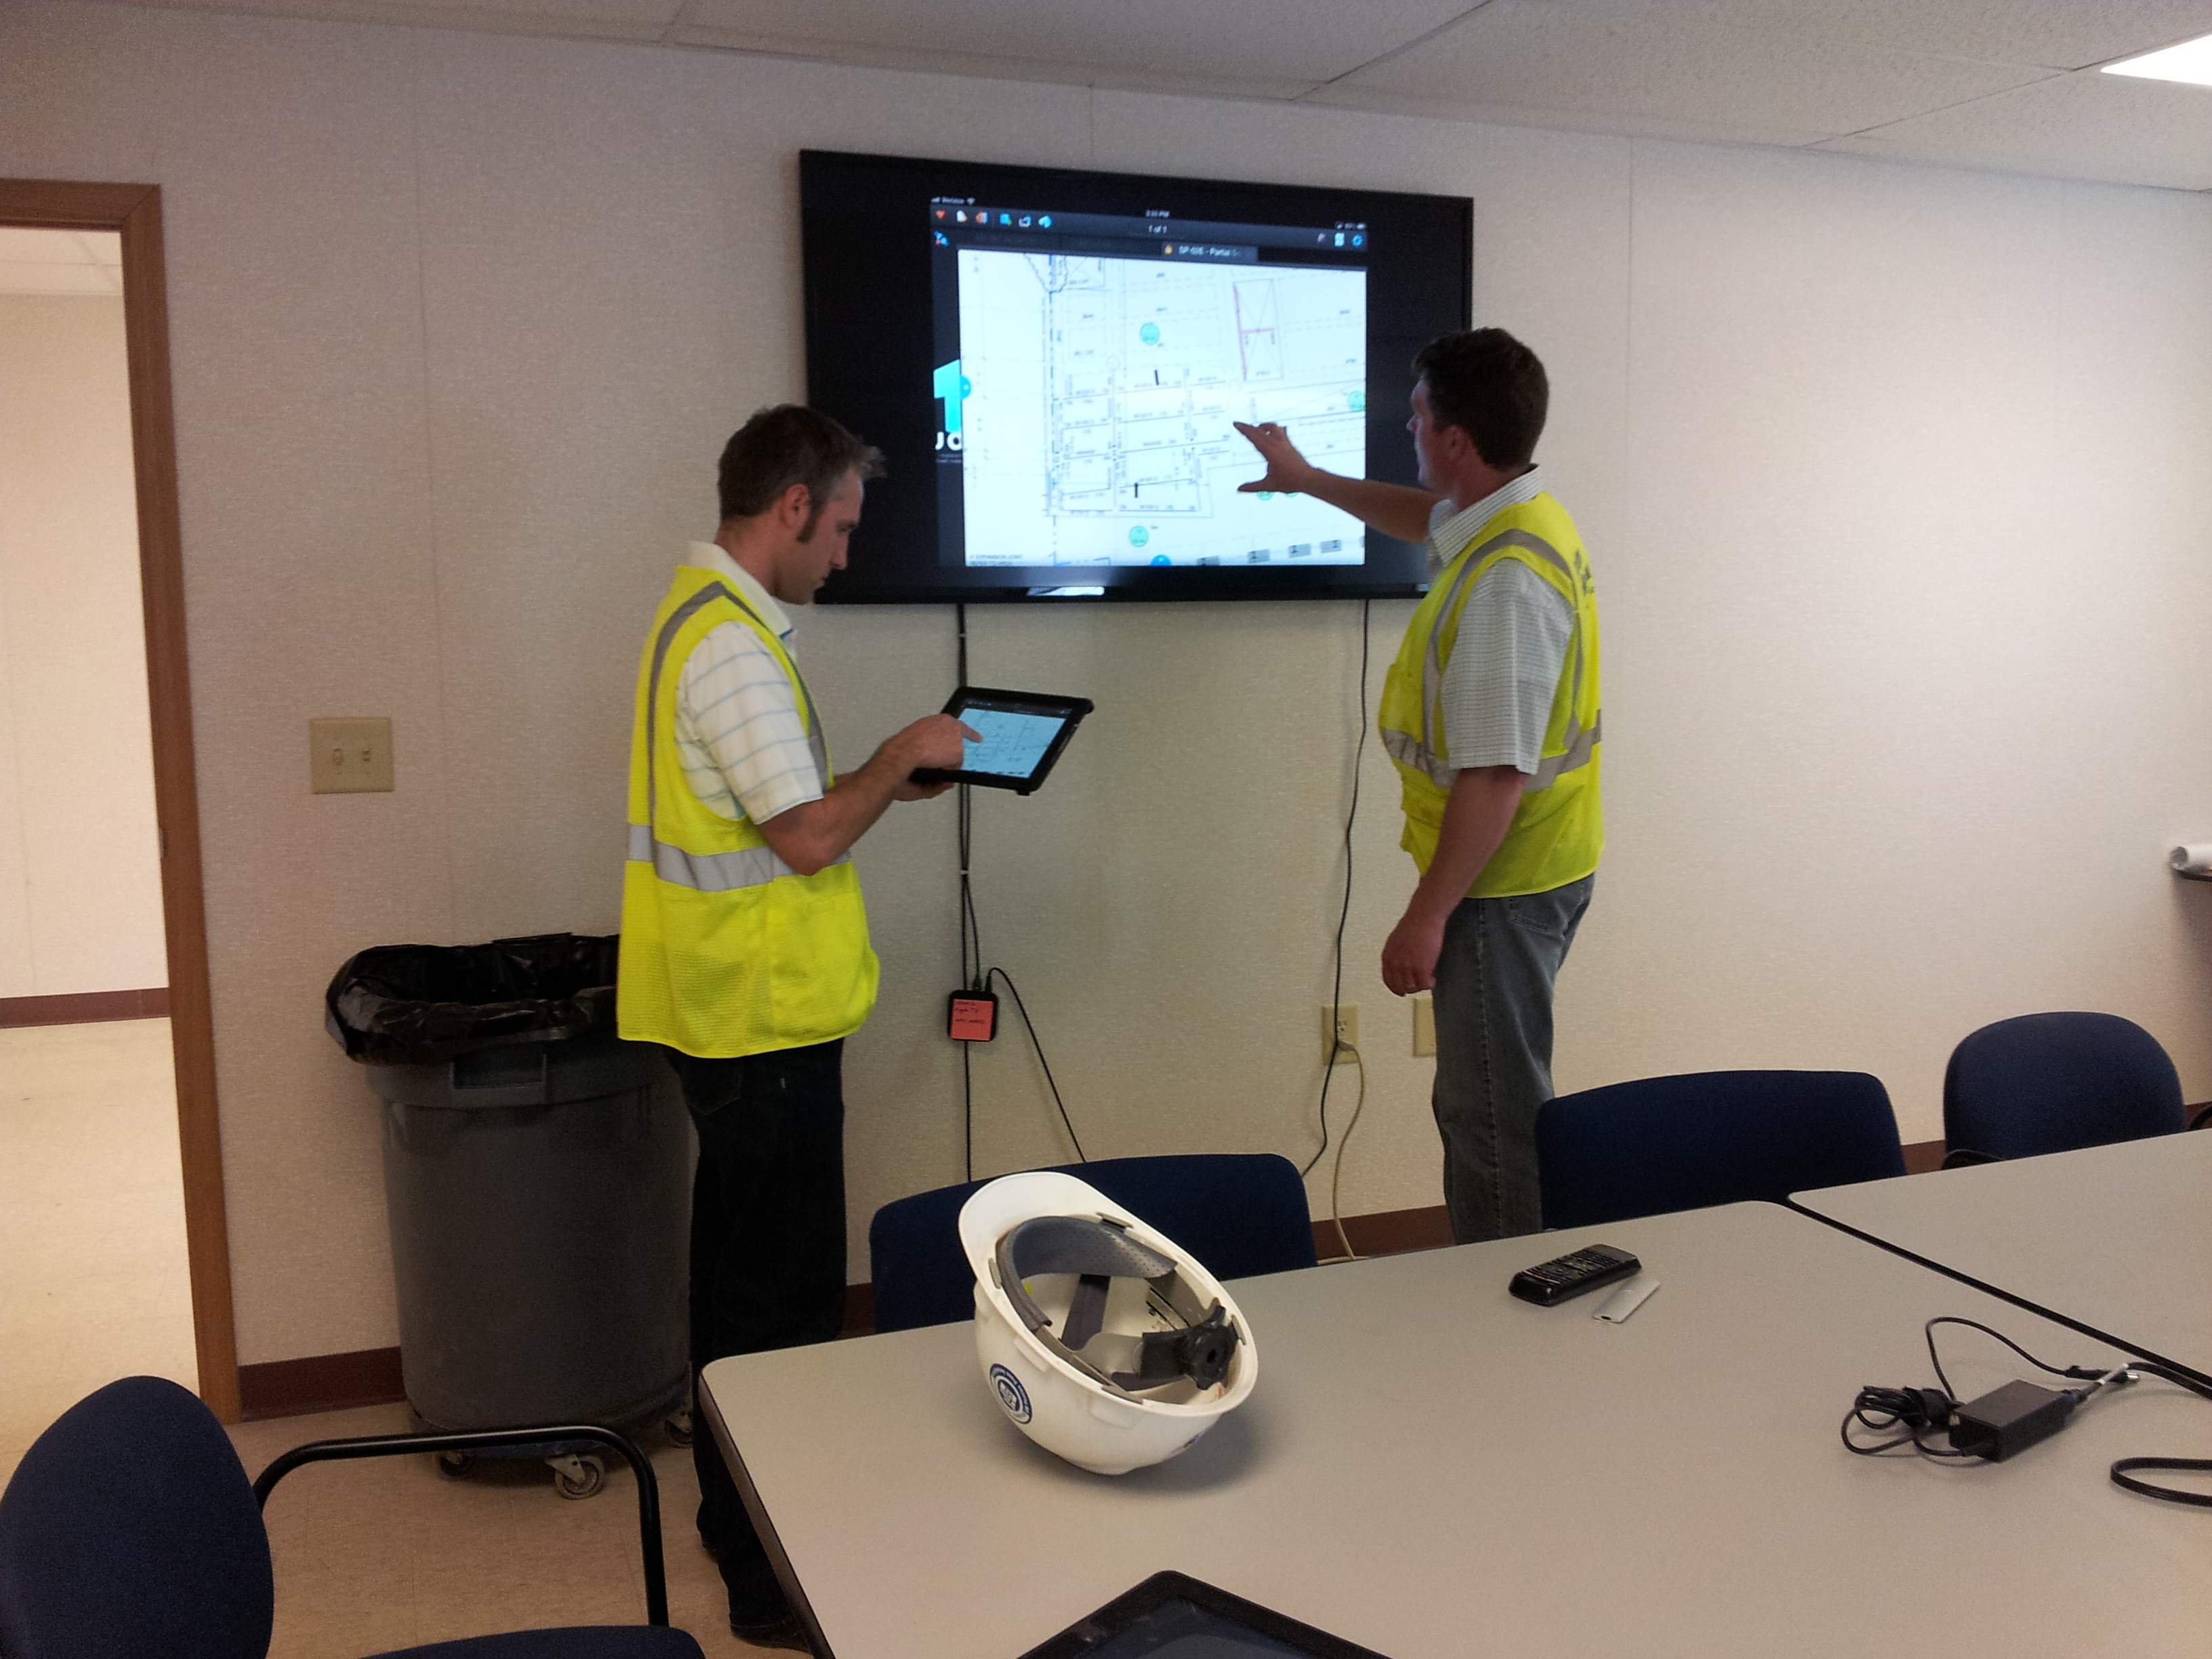 Two standing construction workers plan out their next move on a digital screen.